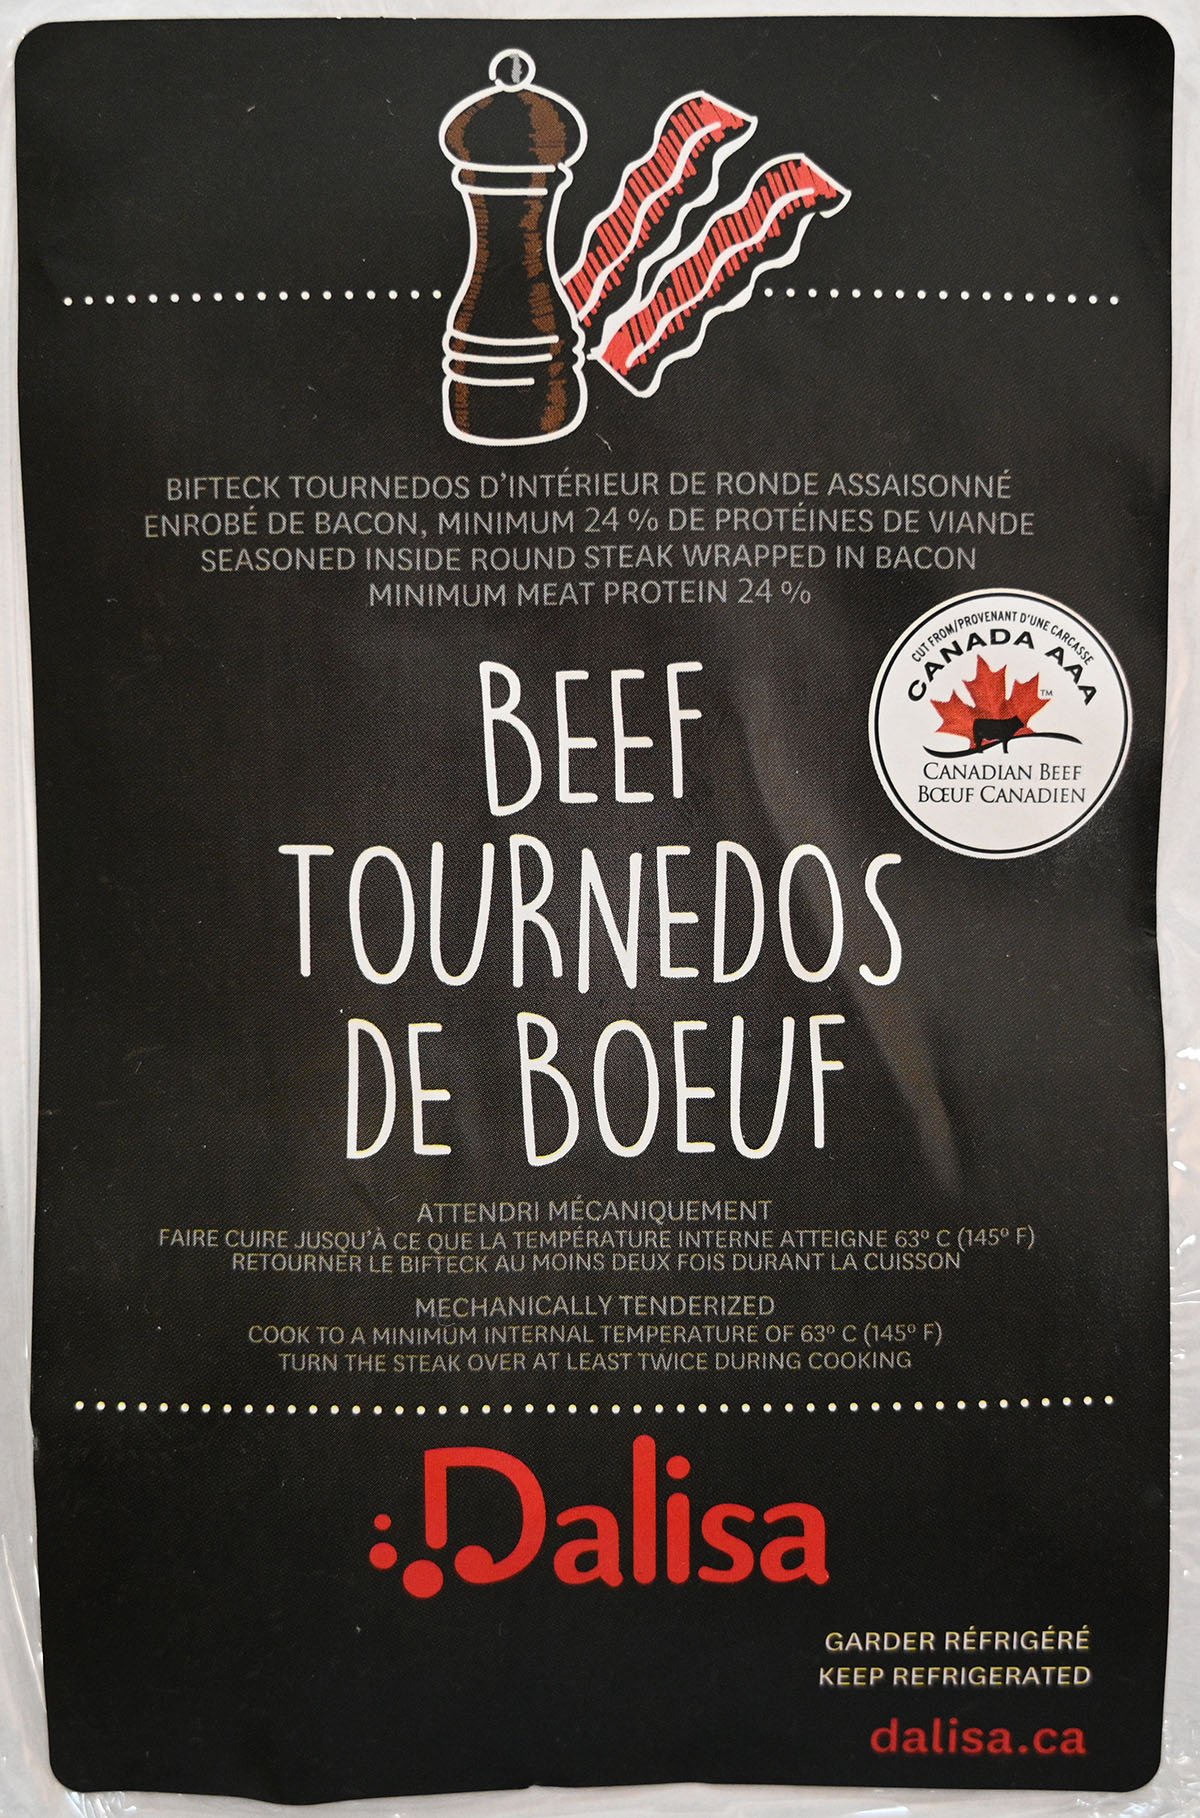 Closeup image of the Costco Dalisa Beef Tournedos label from packaging. 